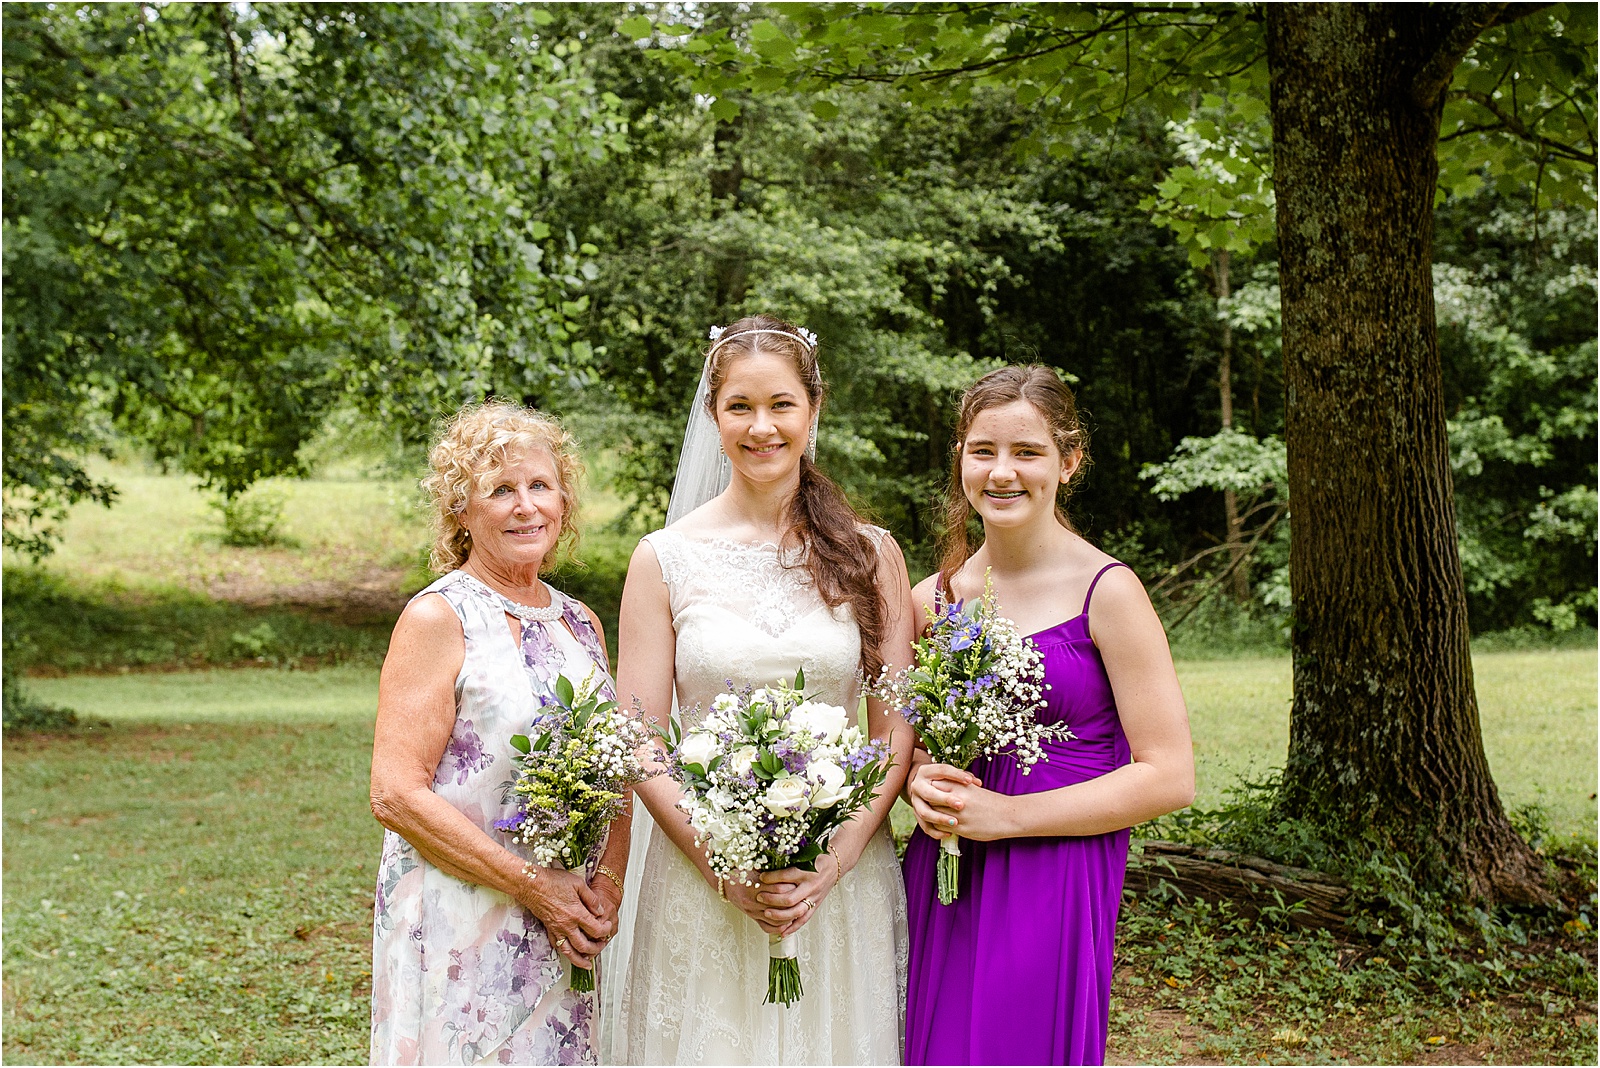 Bride in wedding dress with family in purple